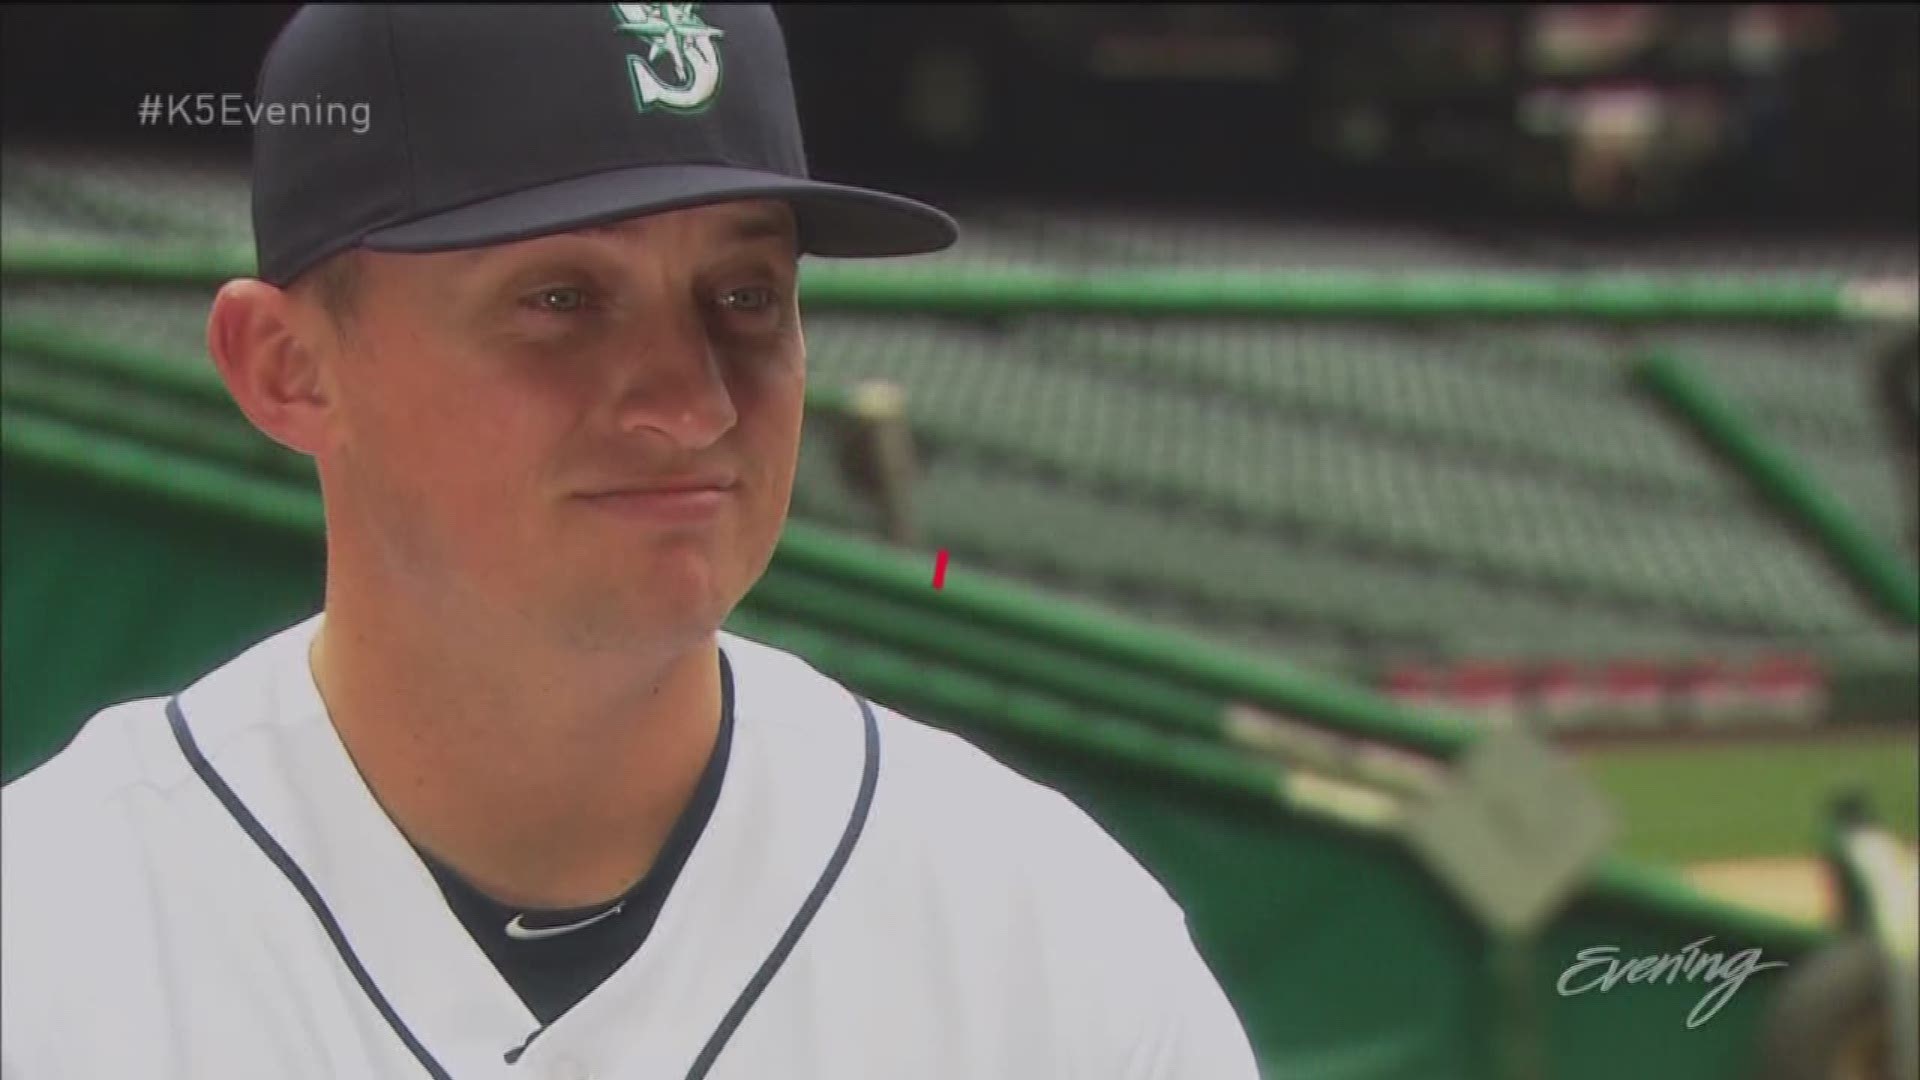 Mariners 3rd baseman Kyle Seager sat down with Evening's Michael King to talk about his post-game routine, his farthest trip away from home and fruit.